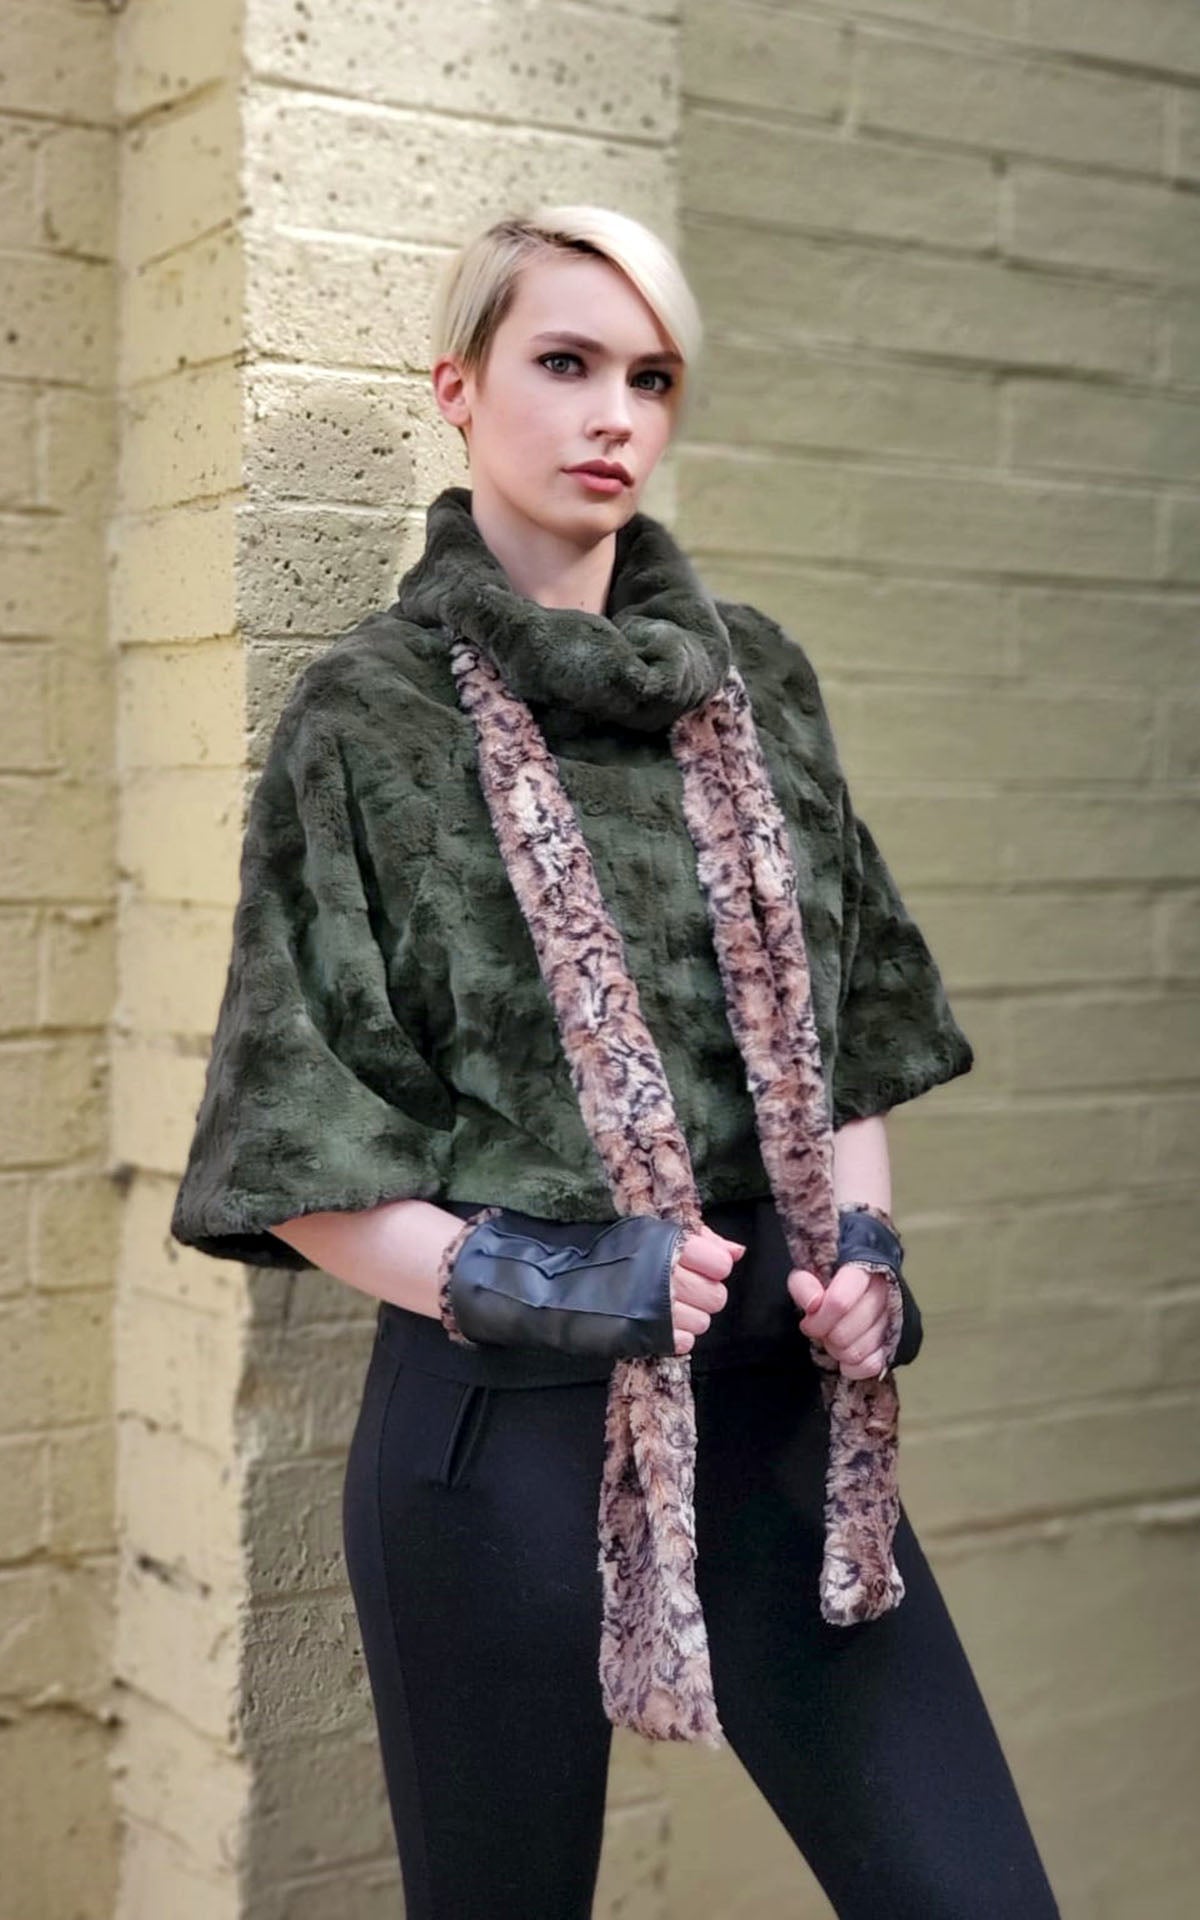 Model Wearing wearing fingerless gloves, sweater top and Classic Skinny Scarf | Carpathian faux fur in brown creams and black | Handmade by Pandemonium Millinery Seattle, WA USA